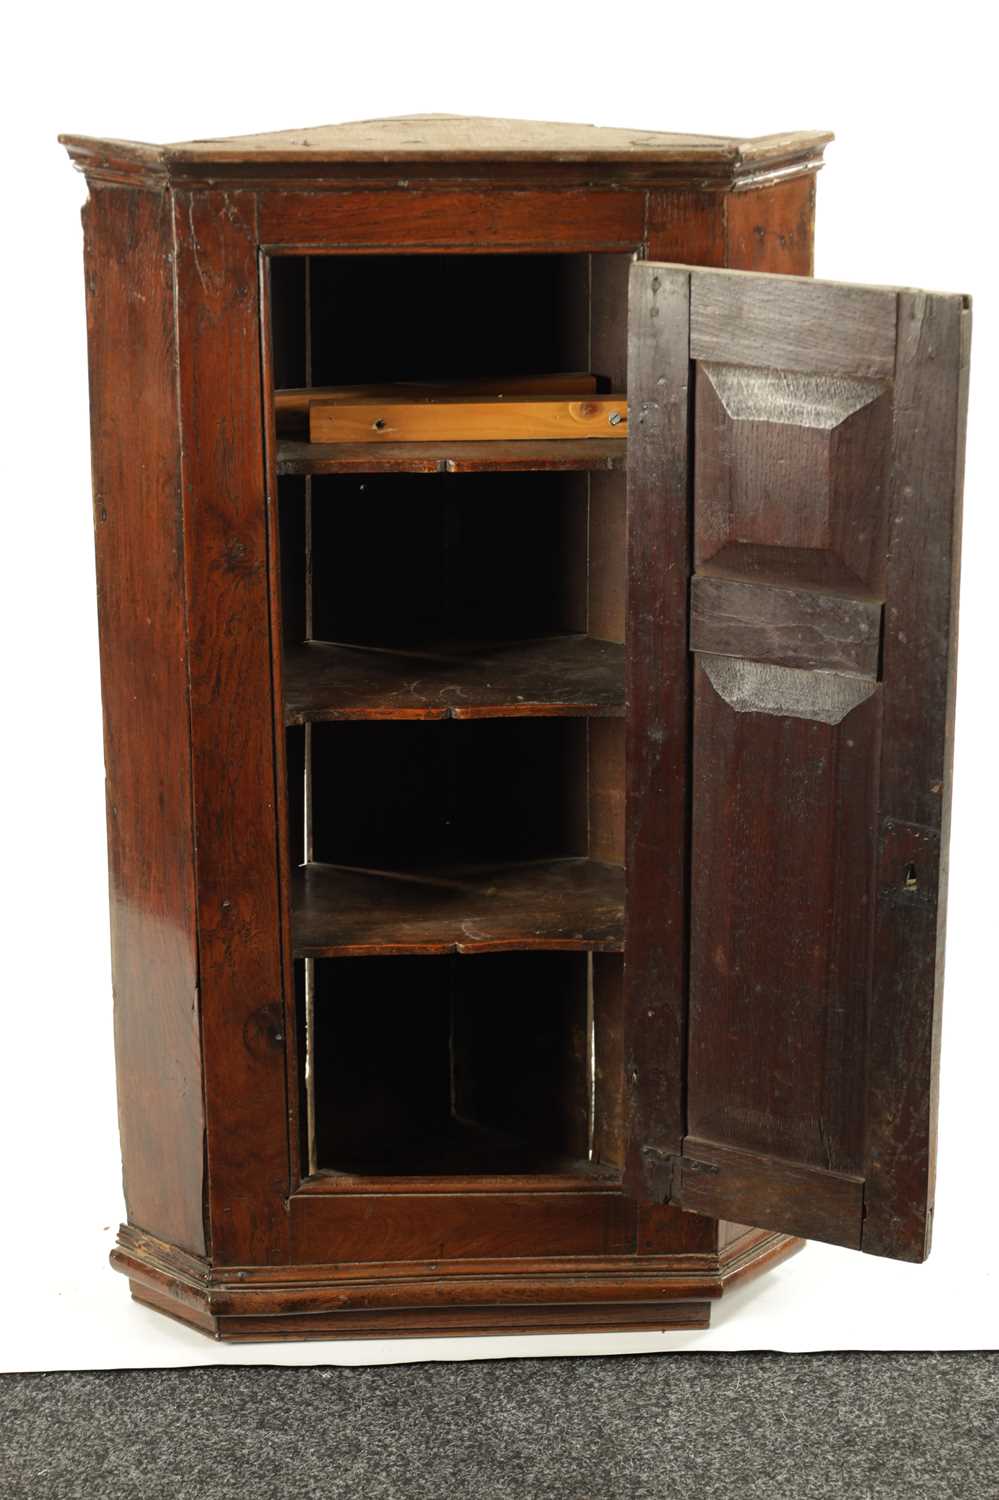 AN EARLY 18TH CENTURY OAK PANELLED HANGING CORNER CUPBOARD - Image 2 of 3